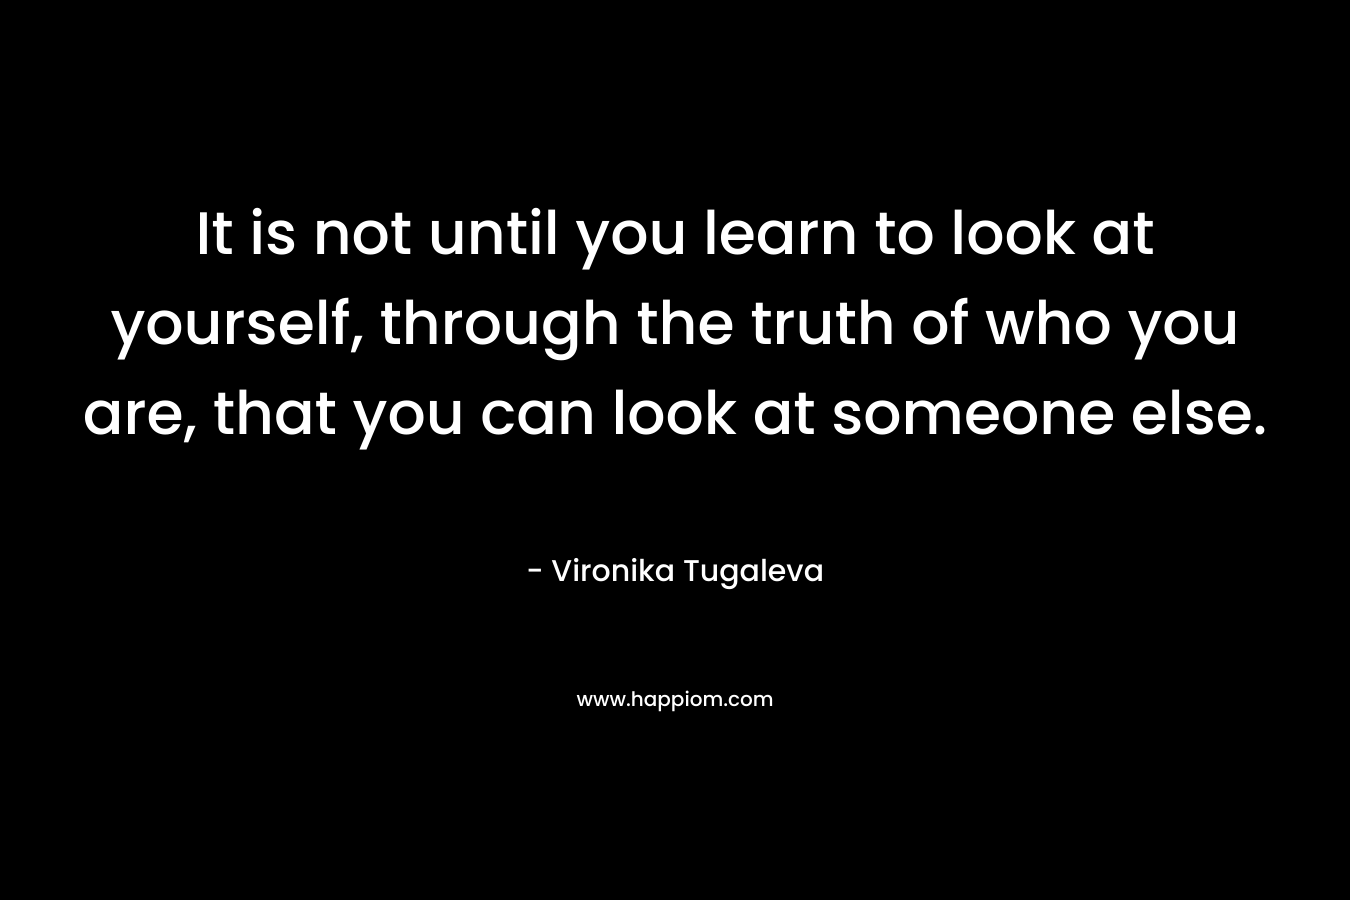 It is not until you learn to look at yourself, through the truth of who you are, that you can look at someone else. – Vironika Tugaleva